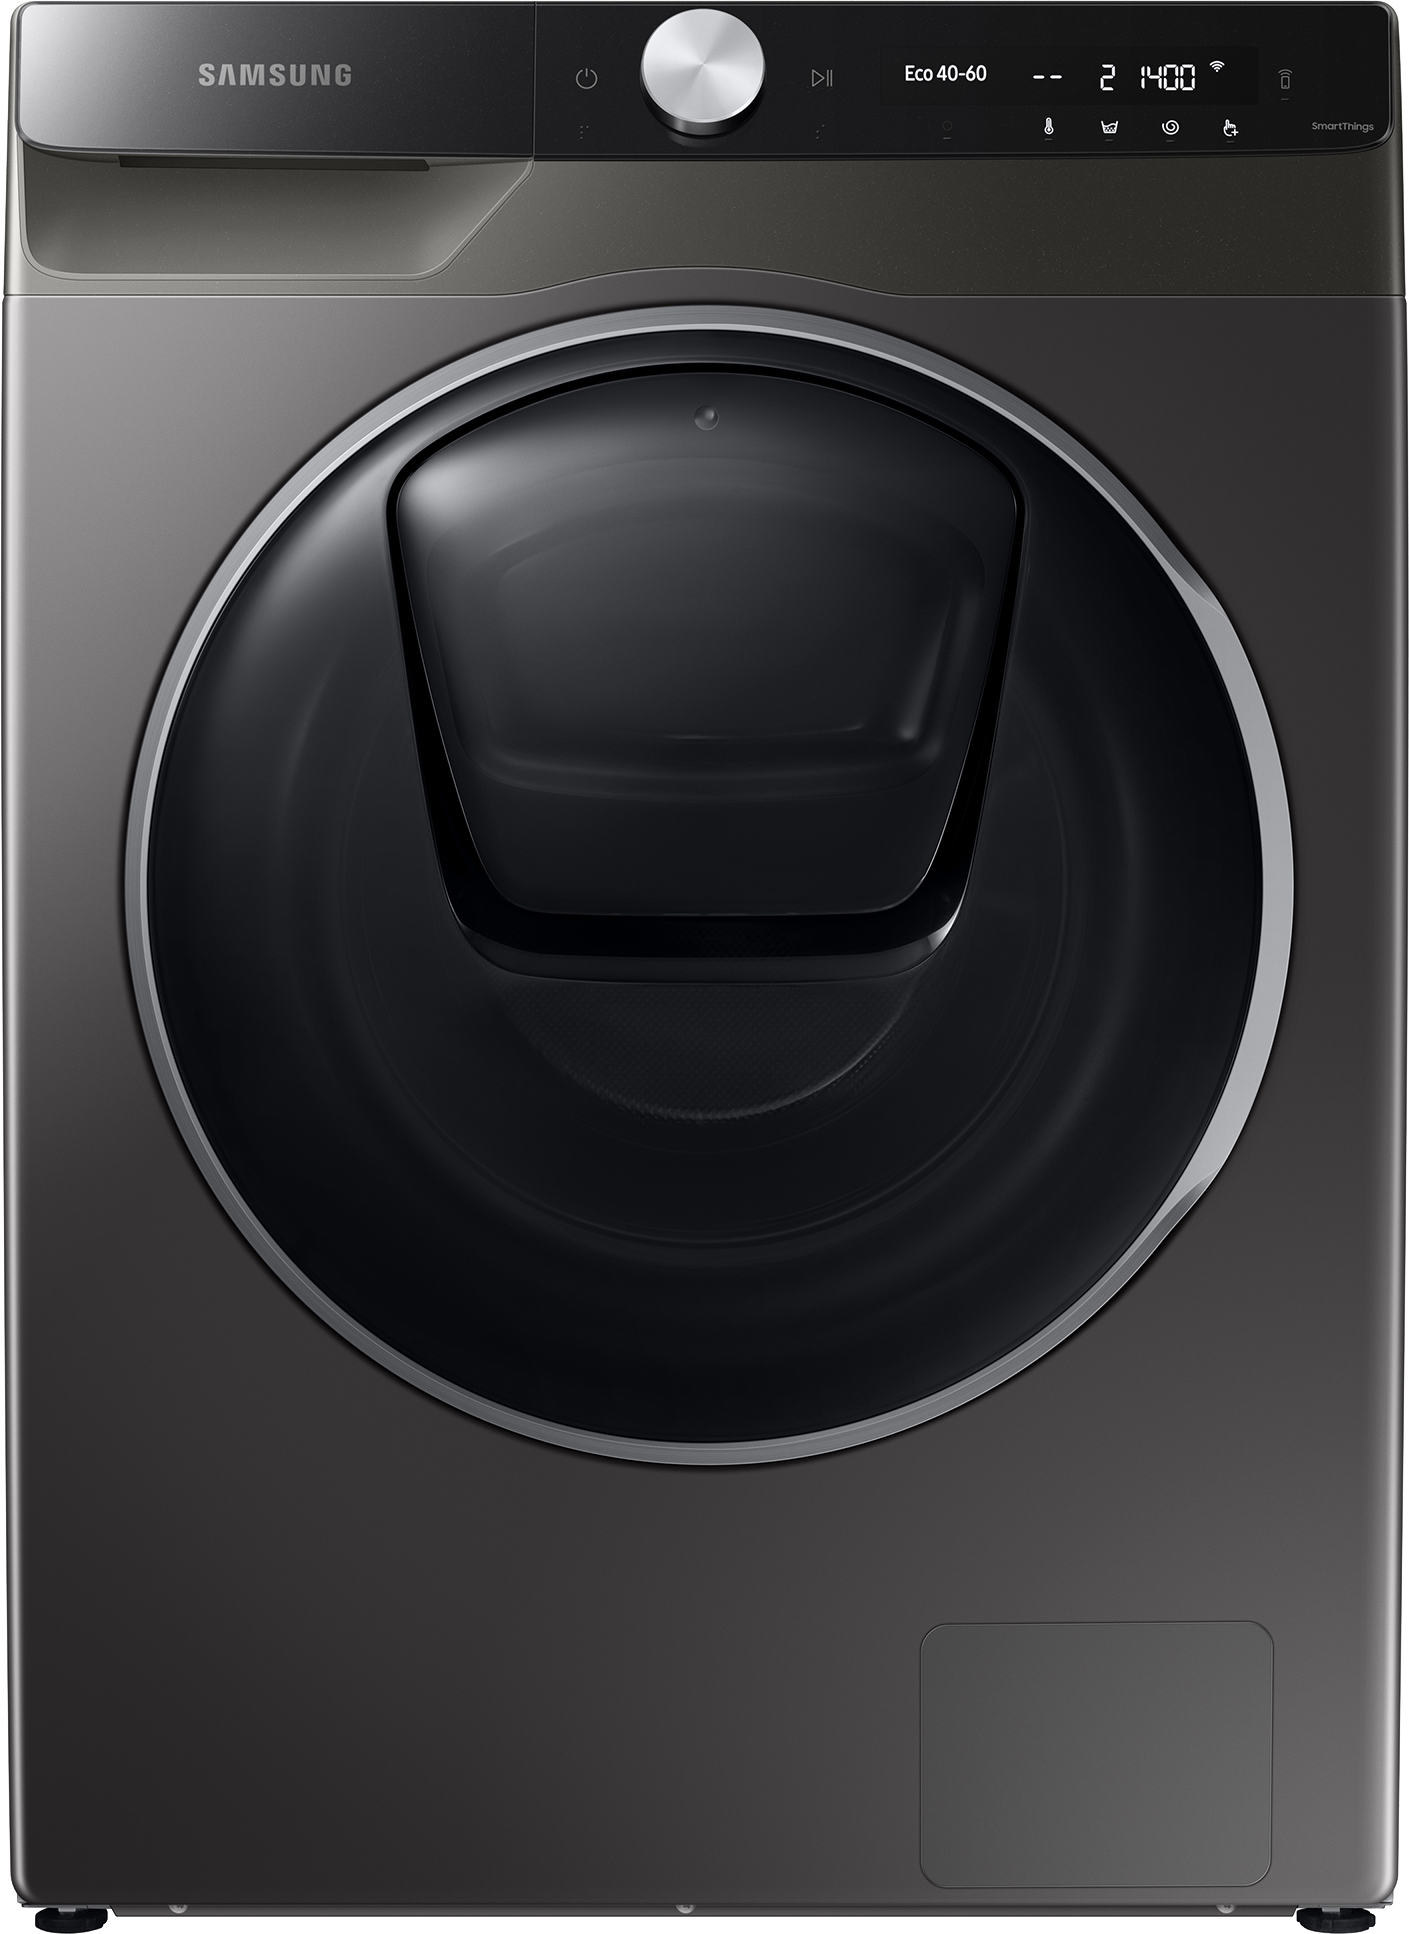 Samsung Series 9 QuickDrive AddWash WW90T986DSX 9kg Washing Machine with 1600 rpm - Graphite - A Rated, Silver